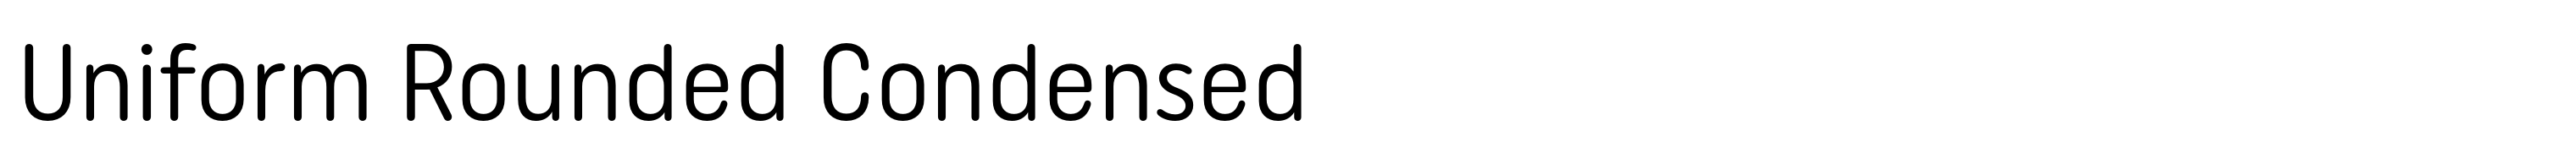 Uniform Rounded Condensed